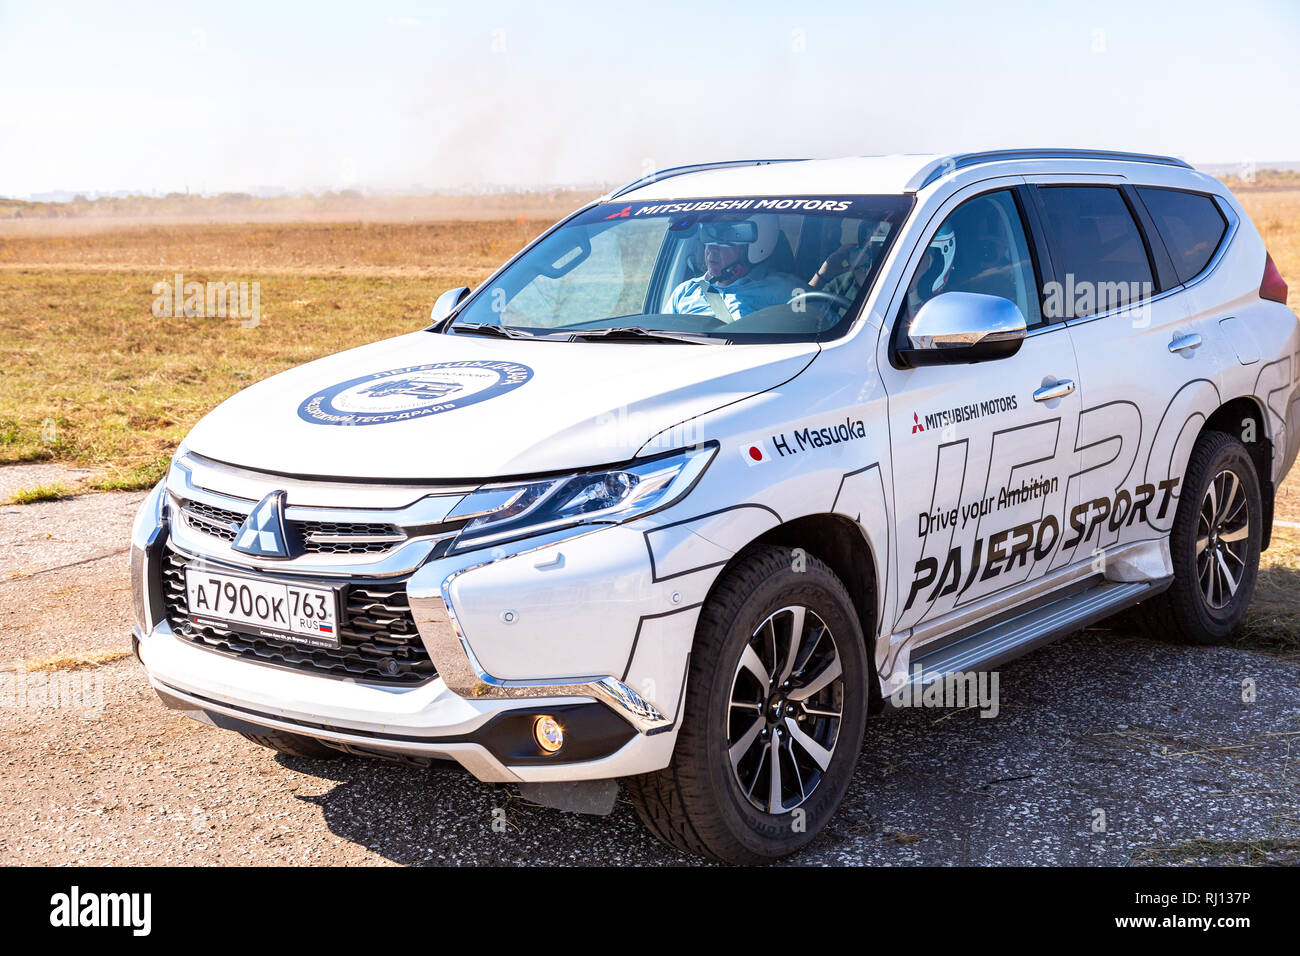 Samara, Russia - September 23, 2018: Off-road car Mitsubishi Pajero Sport 4x4 parked on the field for test driving Stock Photo